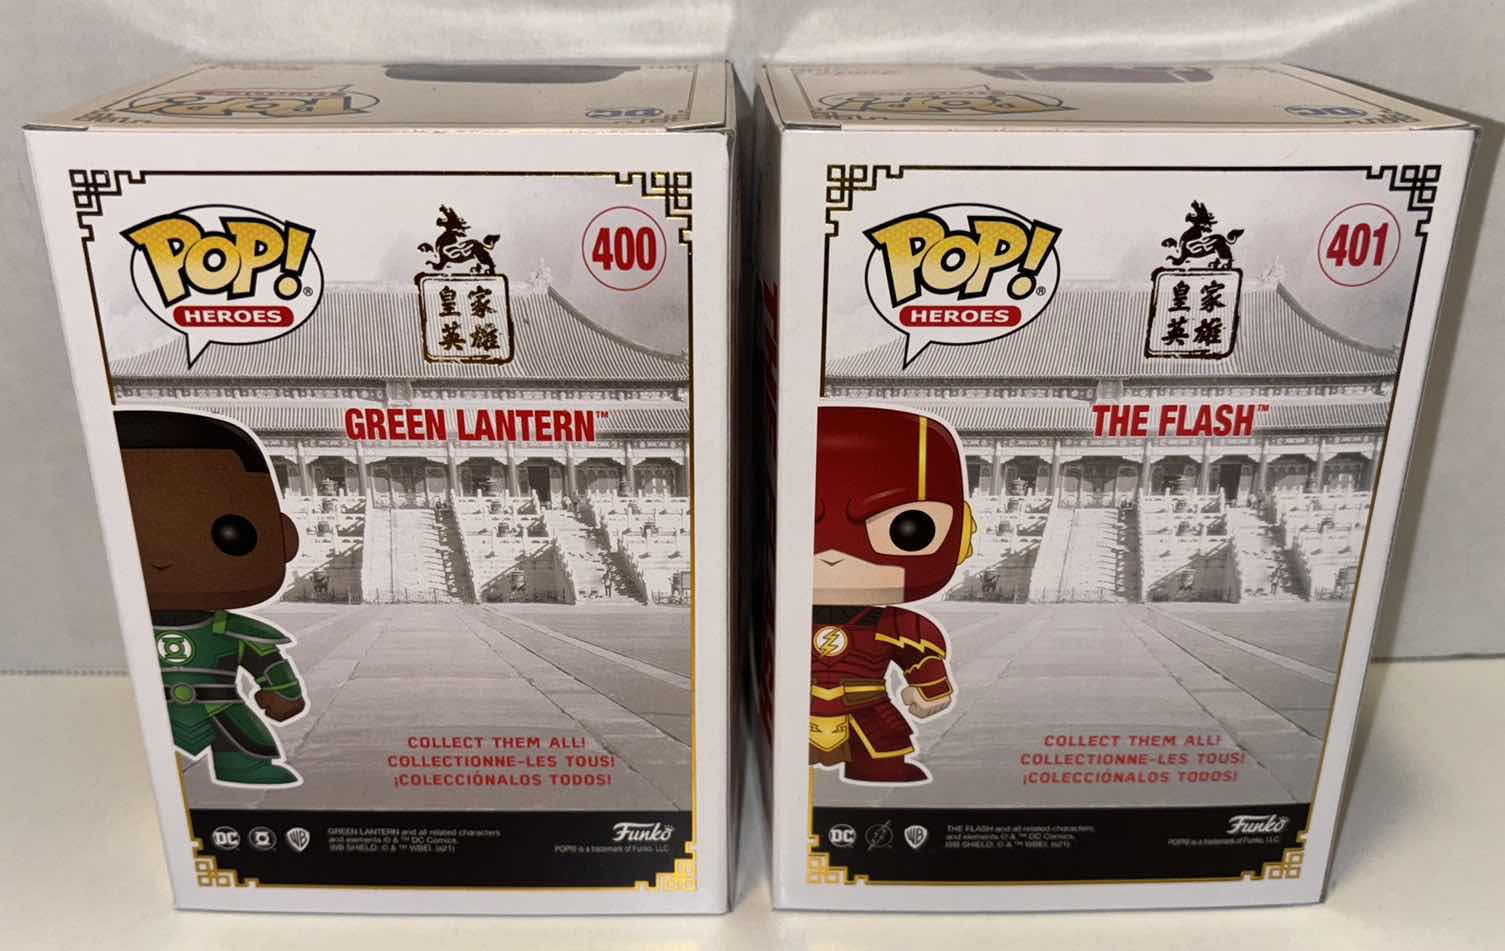 Photo 4 of NEW FUNKO POP! HEROES 2-PACK  DC IMPERIAL PALACE VINYL FIGURES, #400 “GREEN LANTERN” & #401 “THE FLASH”